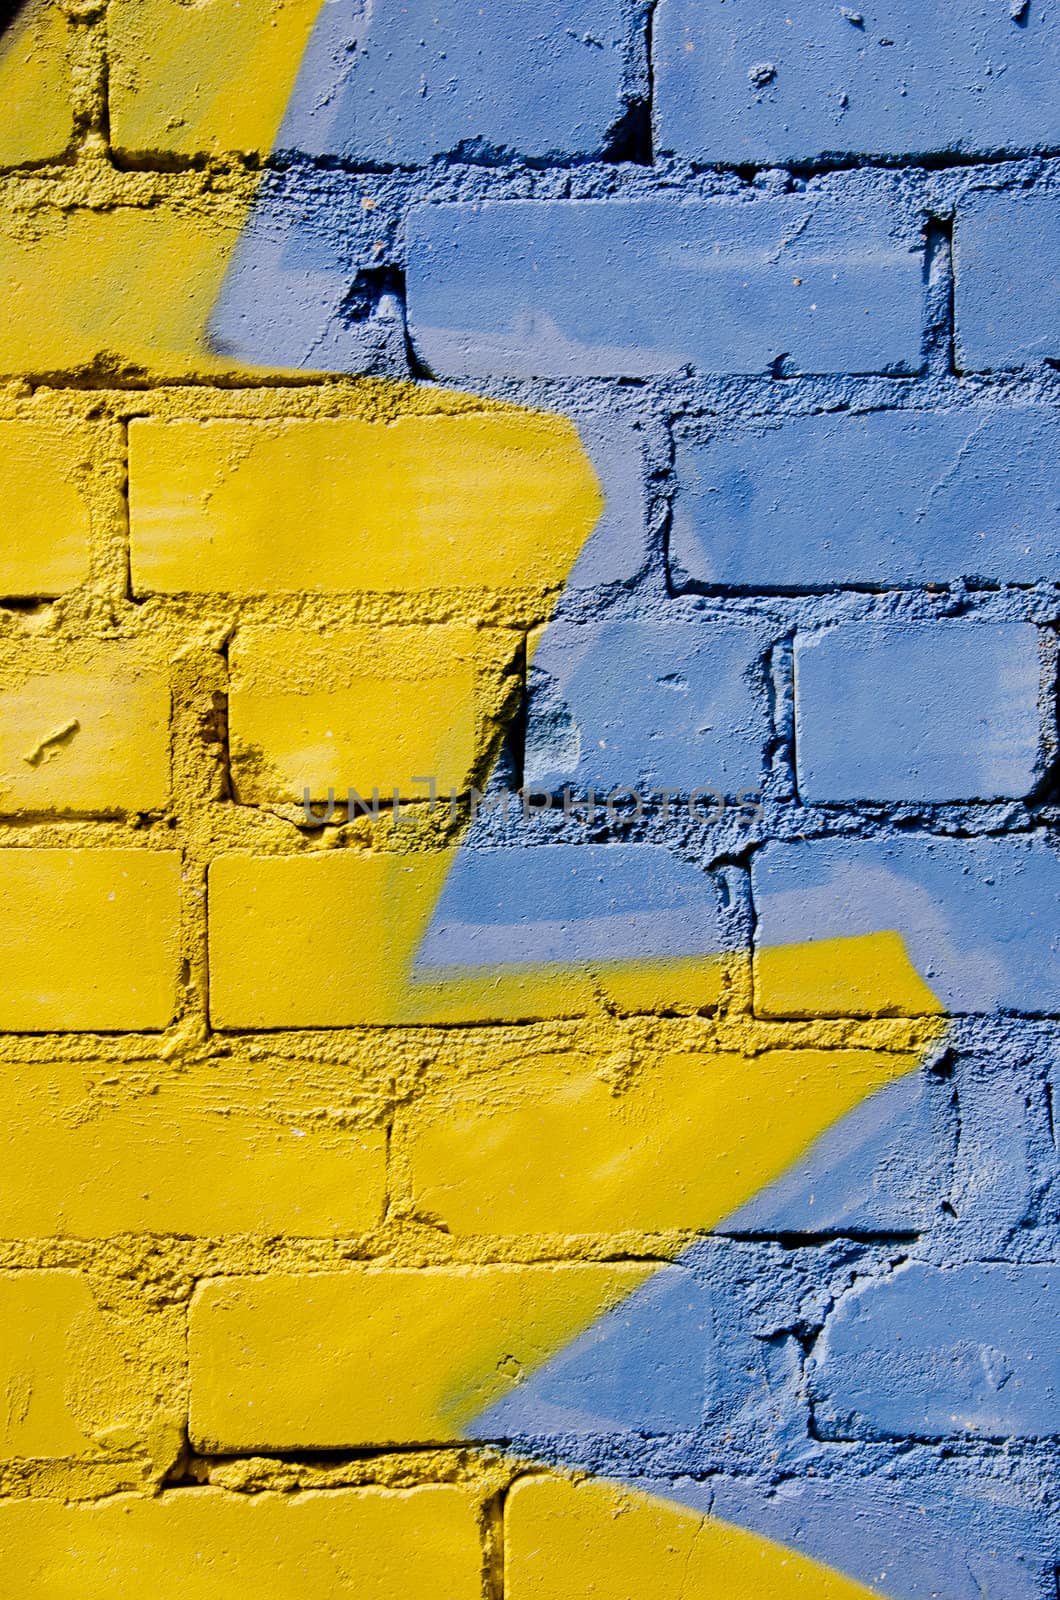 White brick wall colored yellow and blue. Nice background.